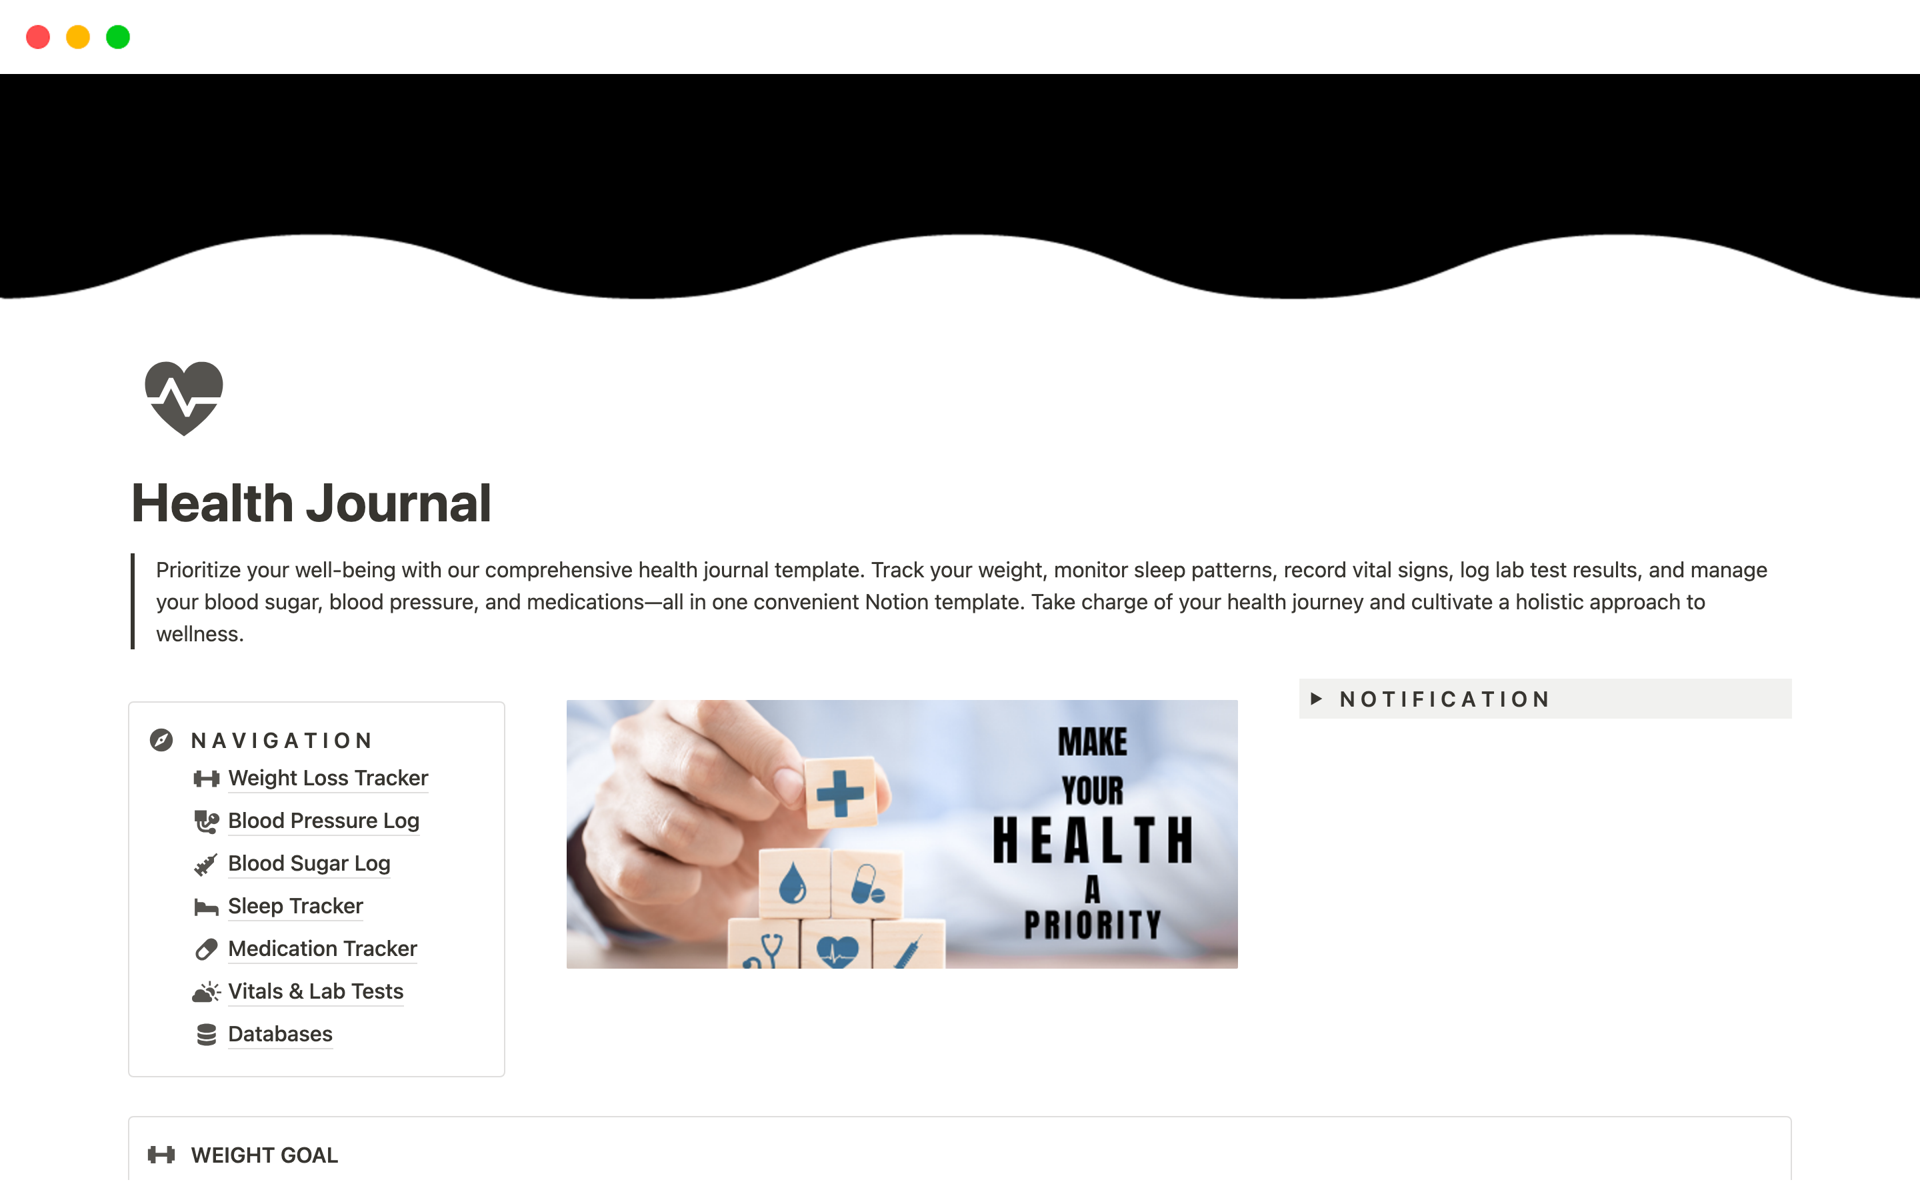 Prioritize your well-being with our comprehensive health journal template.